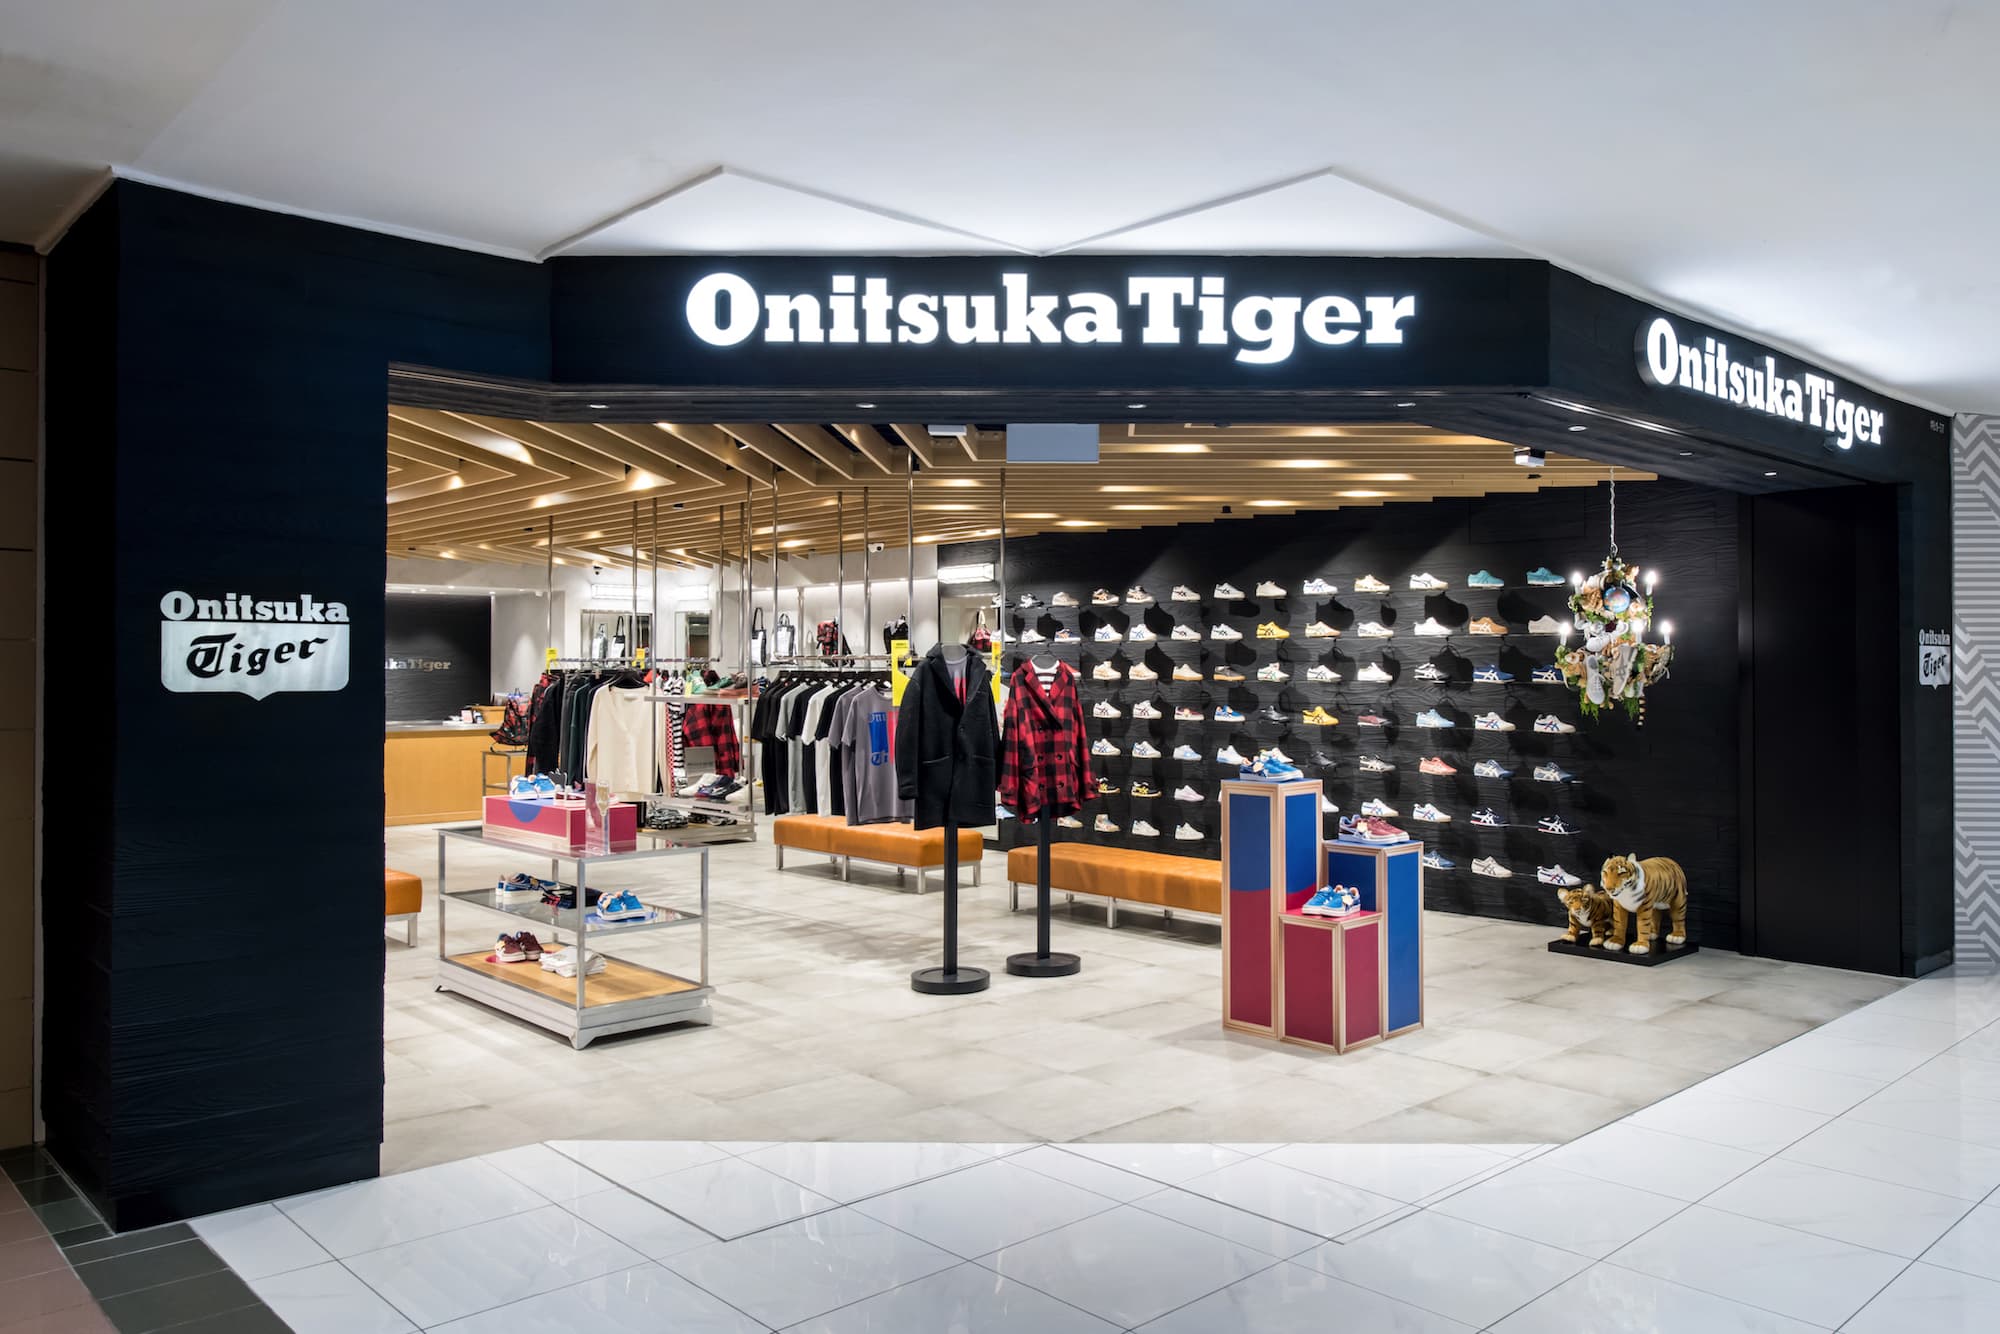 Inside The New Onitsuka Tiger Concept Store In Greenbelt | vlr.eng.br